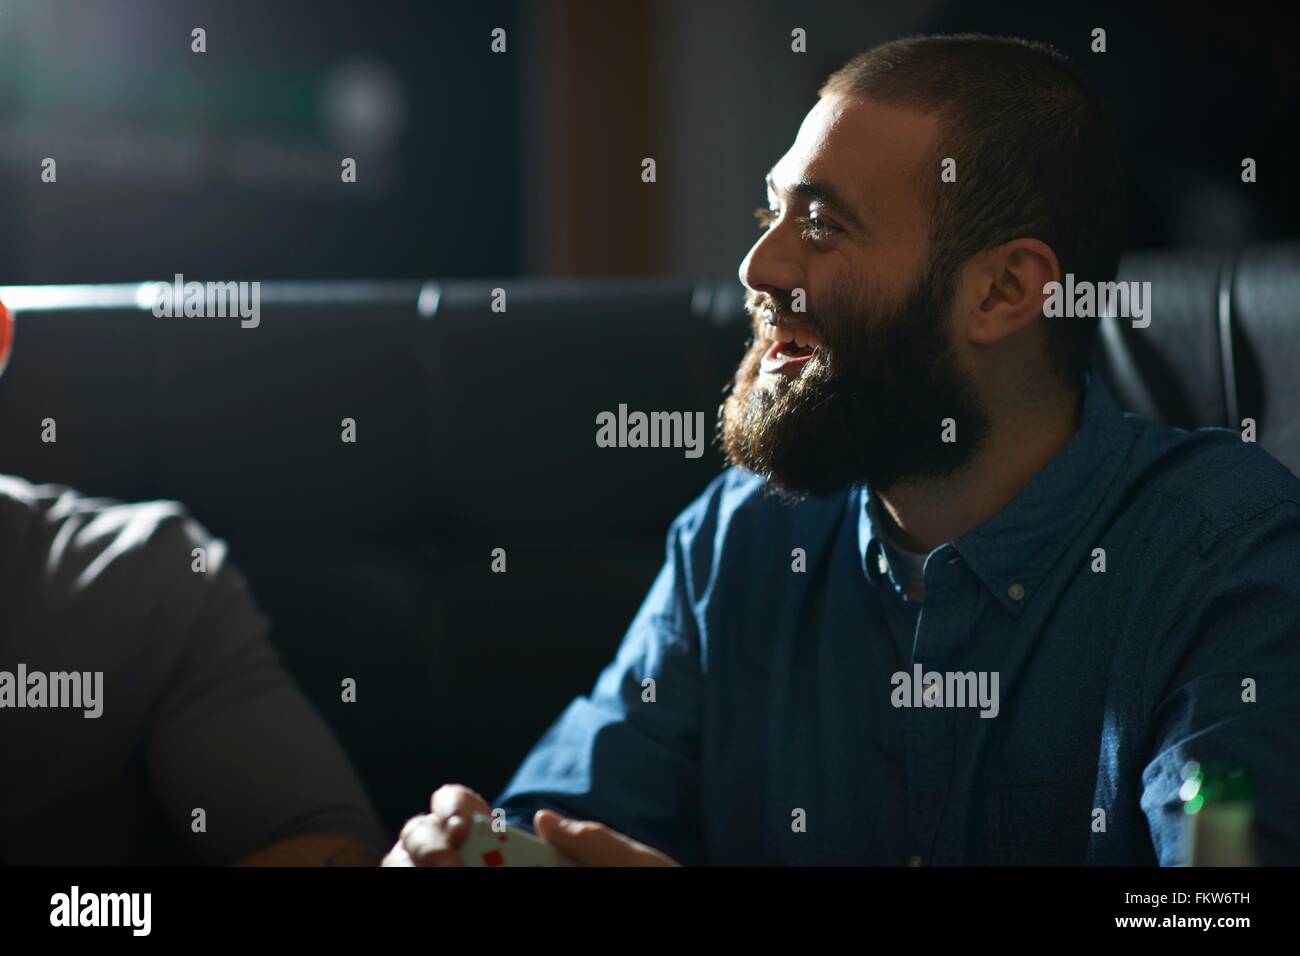 Man shuffling playing cards in traditional UK pub Stock Photo